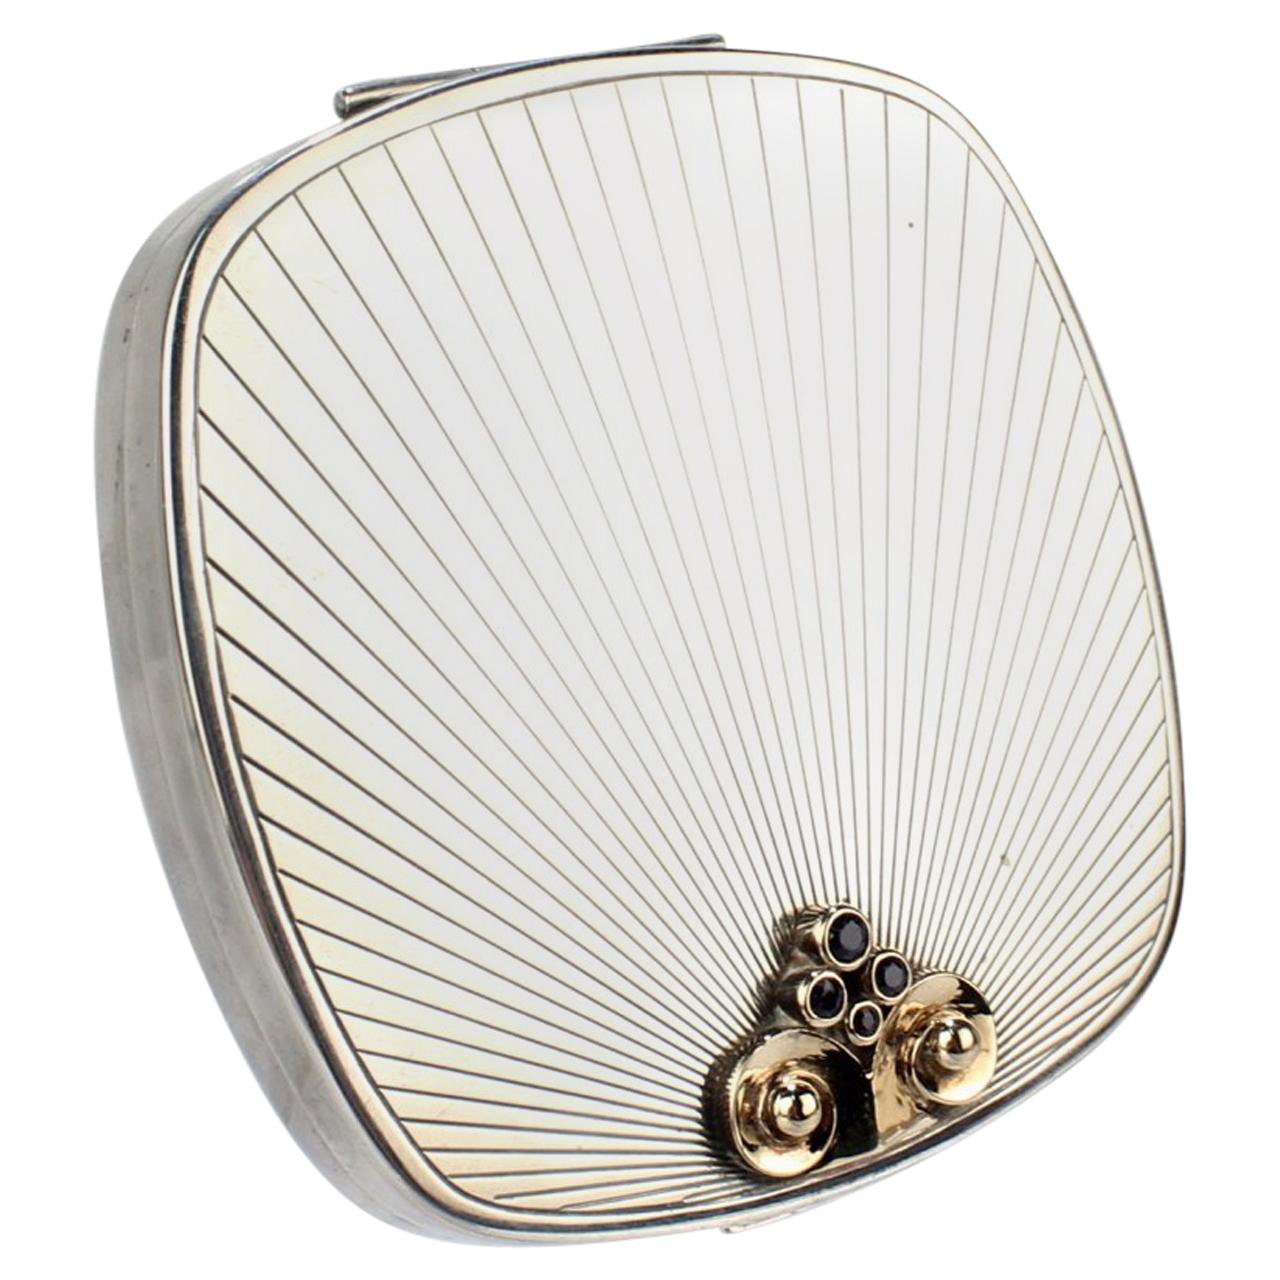 Tiffany & Co. Sterling Gold and Sapphires Mid-Century Modern Compact